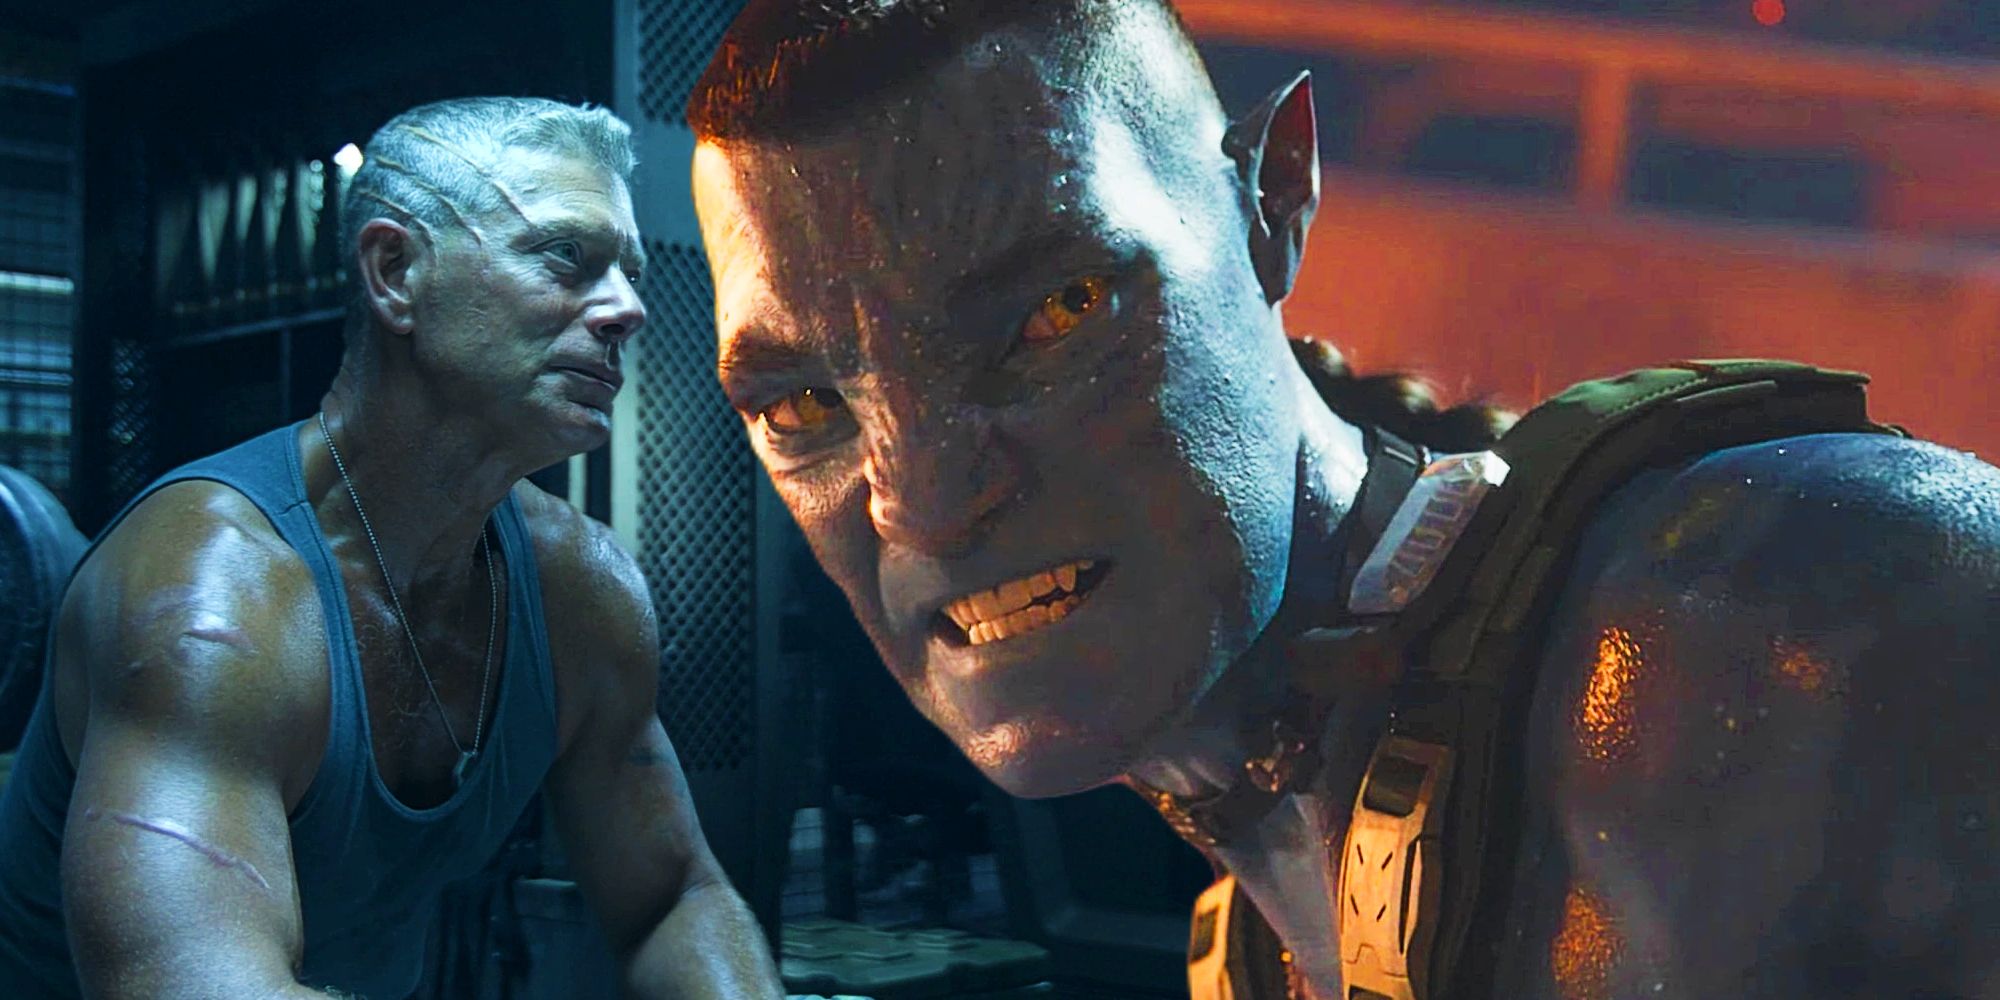 Avatar General looks like Duke Nukem apparently Im not the only one who  thinks they look alike  Stephen lang Comic book characters Tough guy